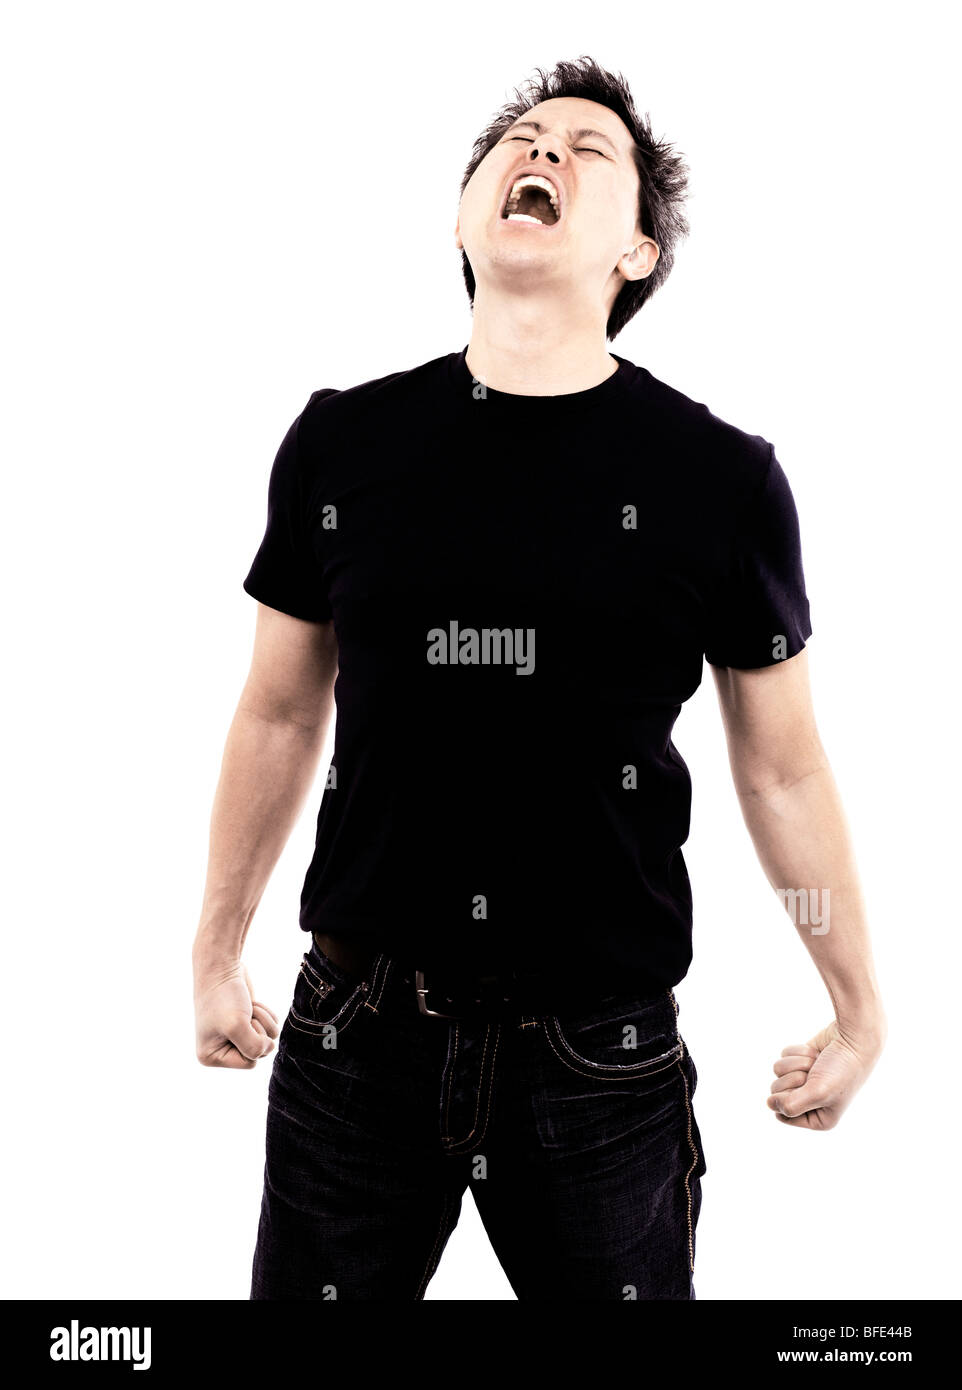 44 year old Asian male wearing jeans and a blue t-shirt standing against a white background screaming Stock Photo